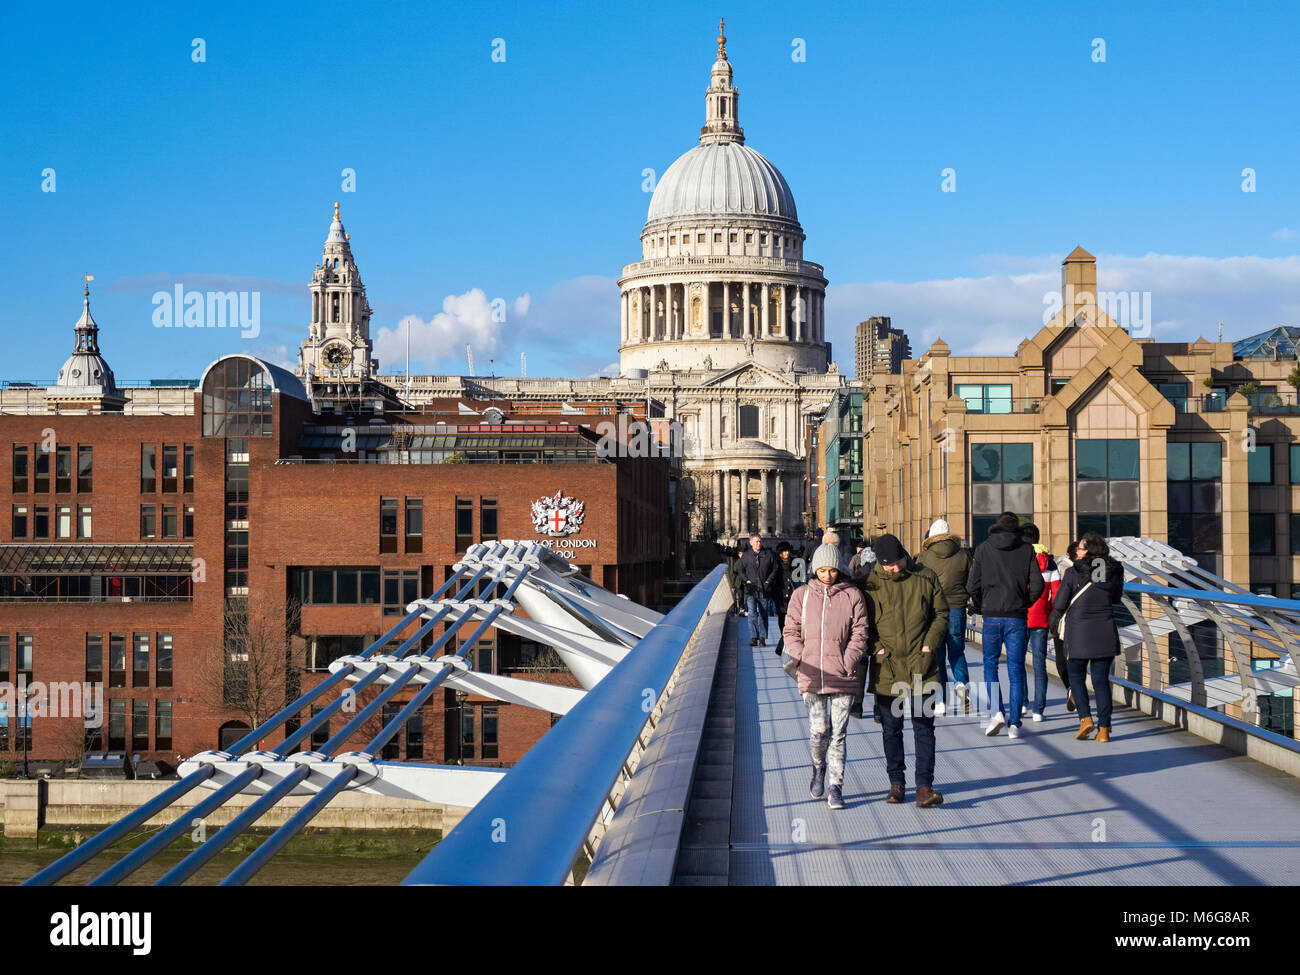 People on the Millennium Bridge with St Paul's Cathedral in the background, London England United Kingdom UK Stock Photo